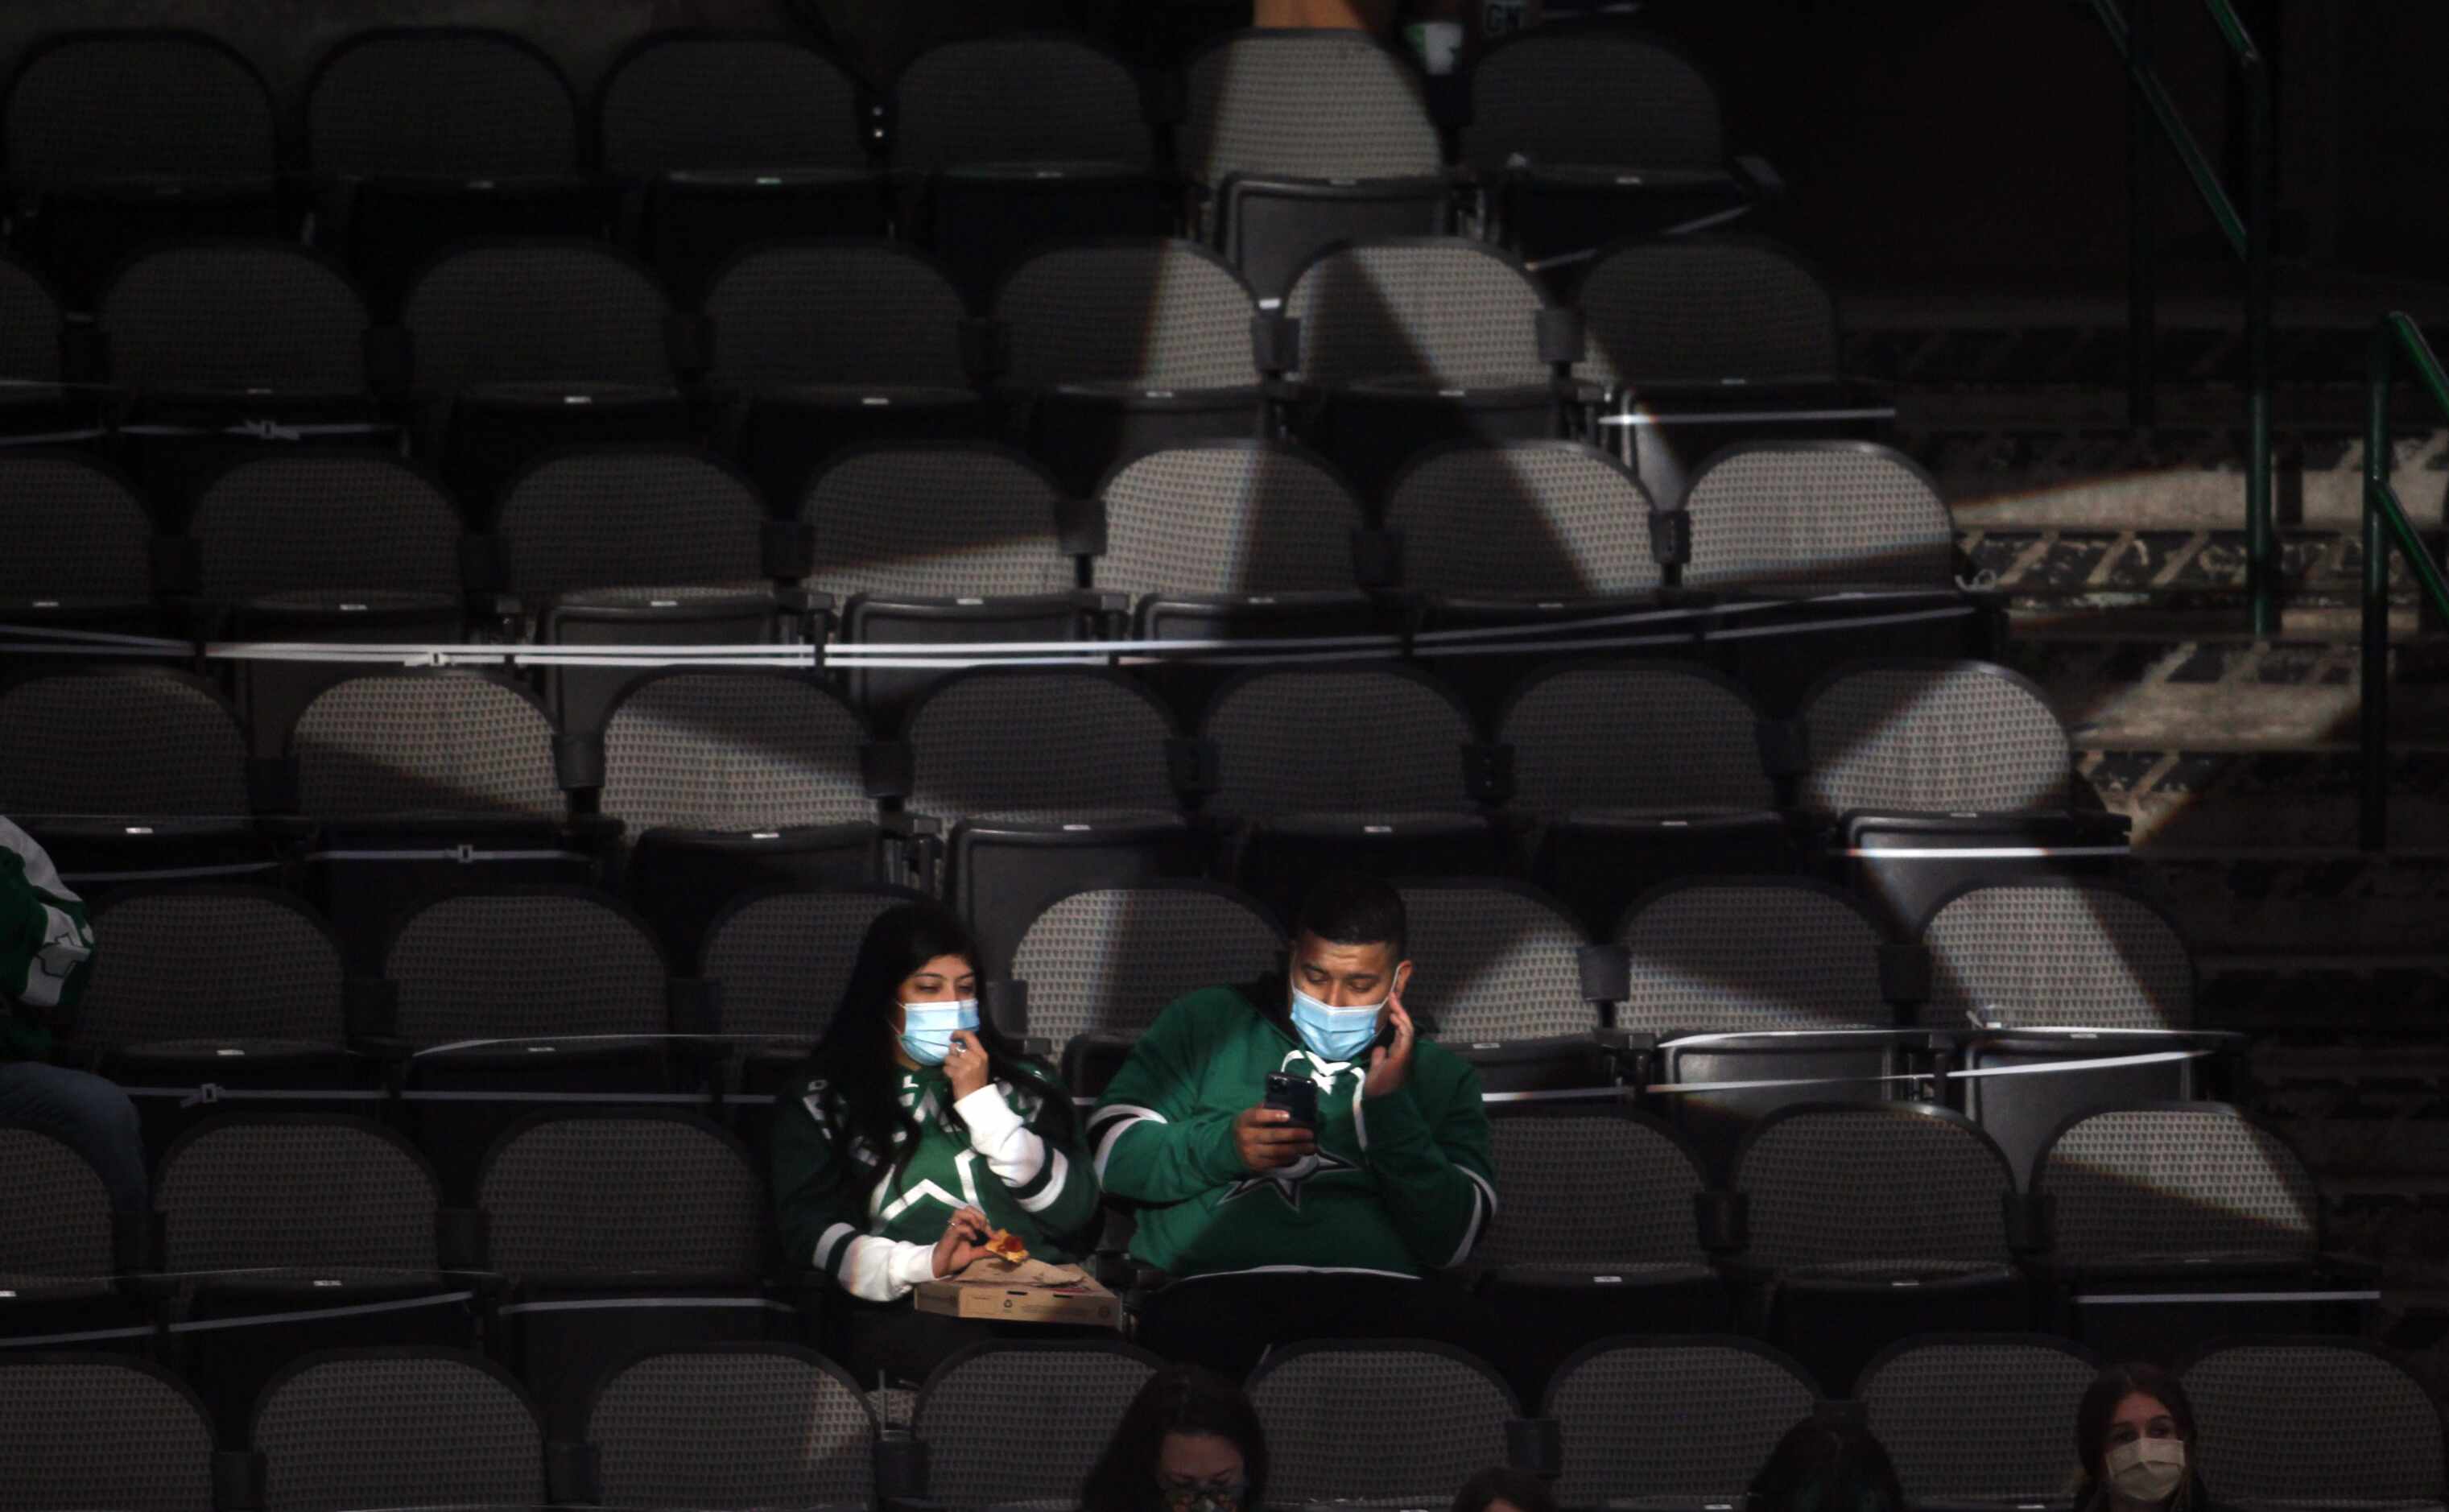 A couple of Dallas Stars fans are illuminated and framed by an illuminated star passing...